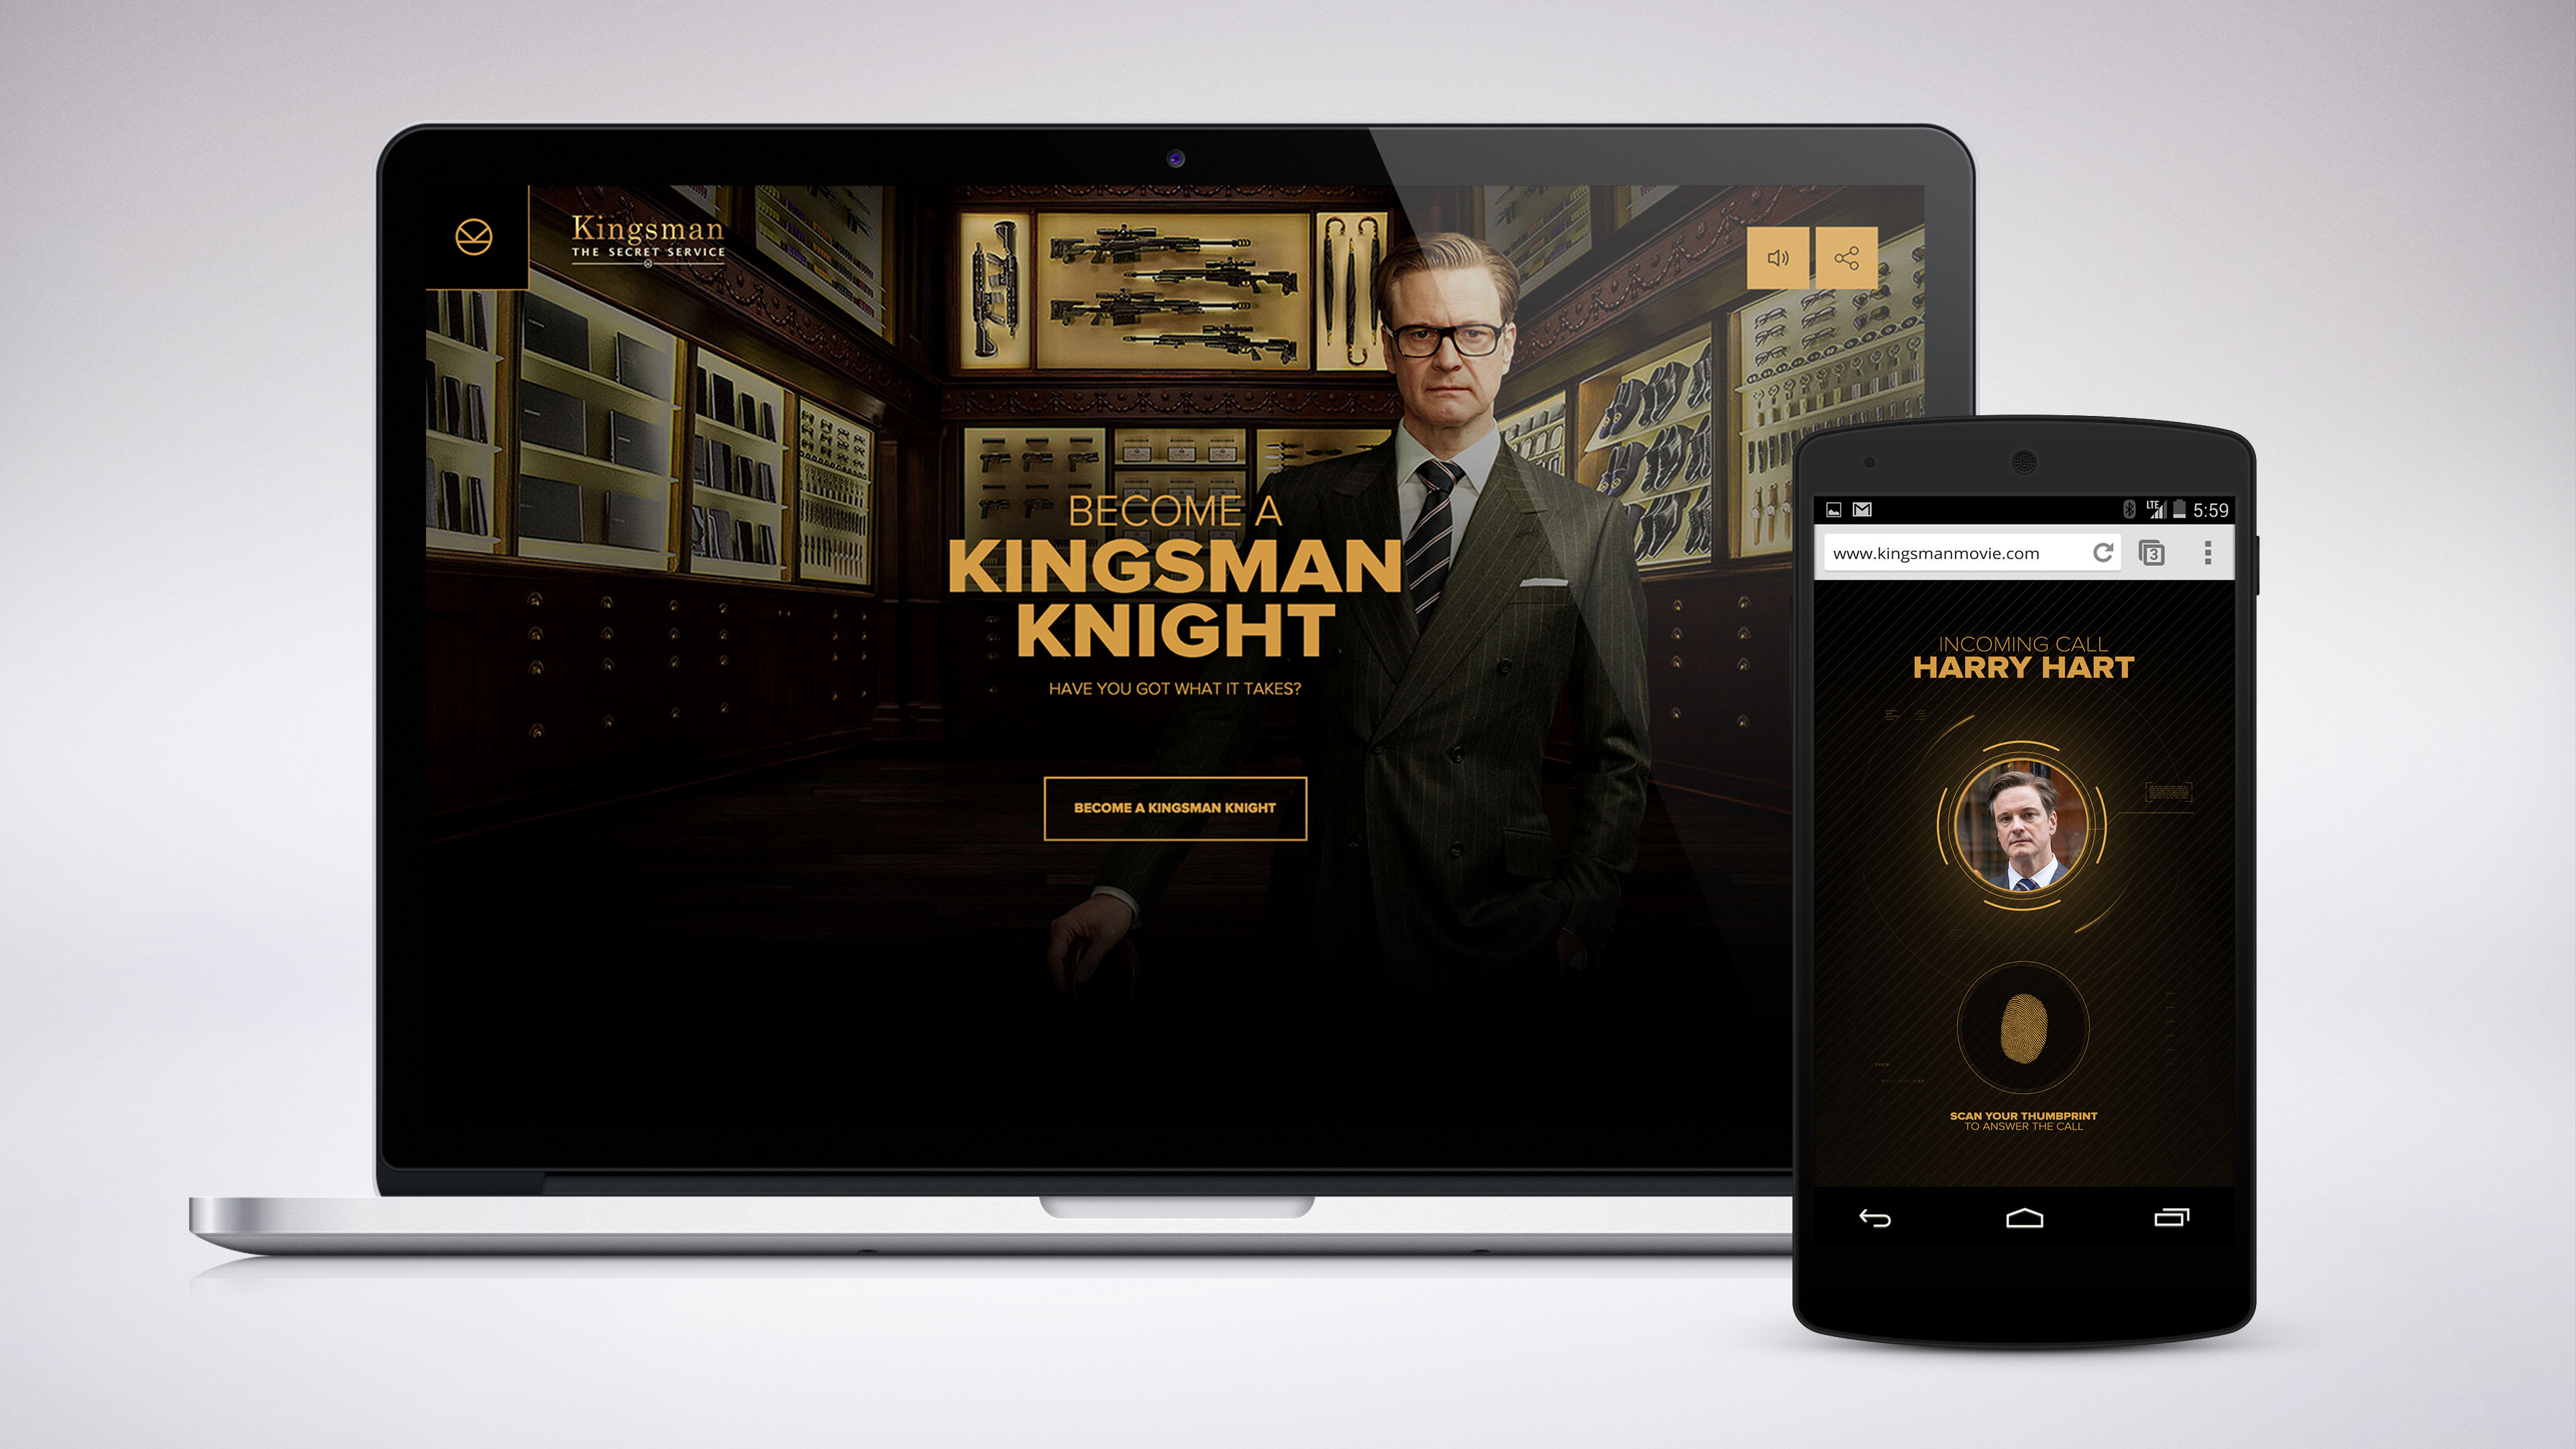 3840x2160 ... movie (you should), Kingsman is an action spy film directed by Matthew  Vaughn, based on Dave Gibbons and Mark Millar's comic book, The Secret  Service.